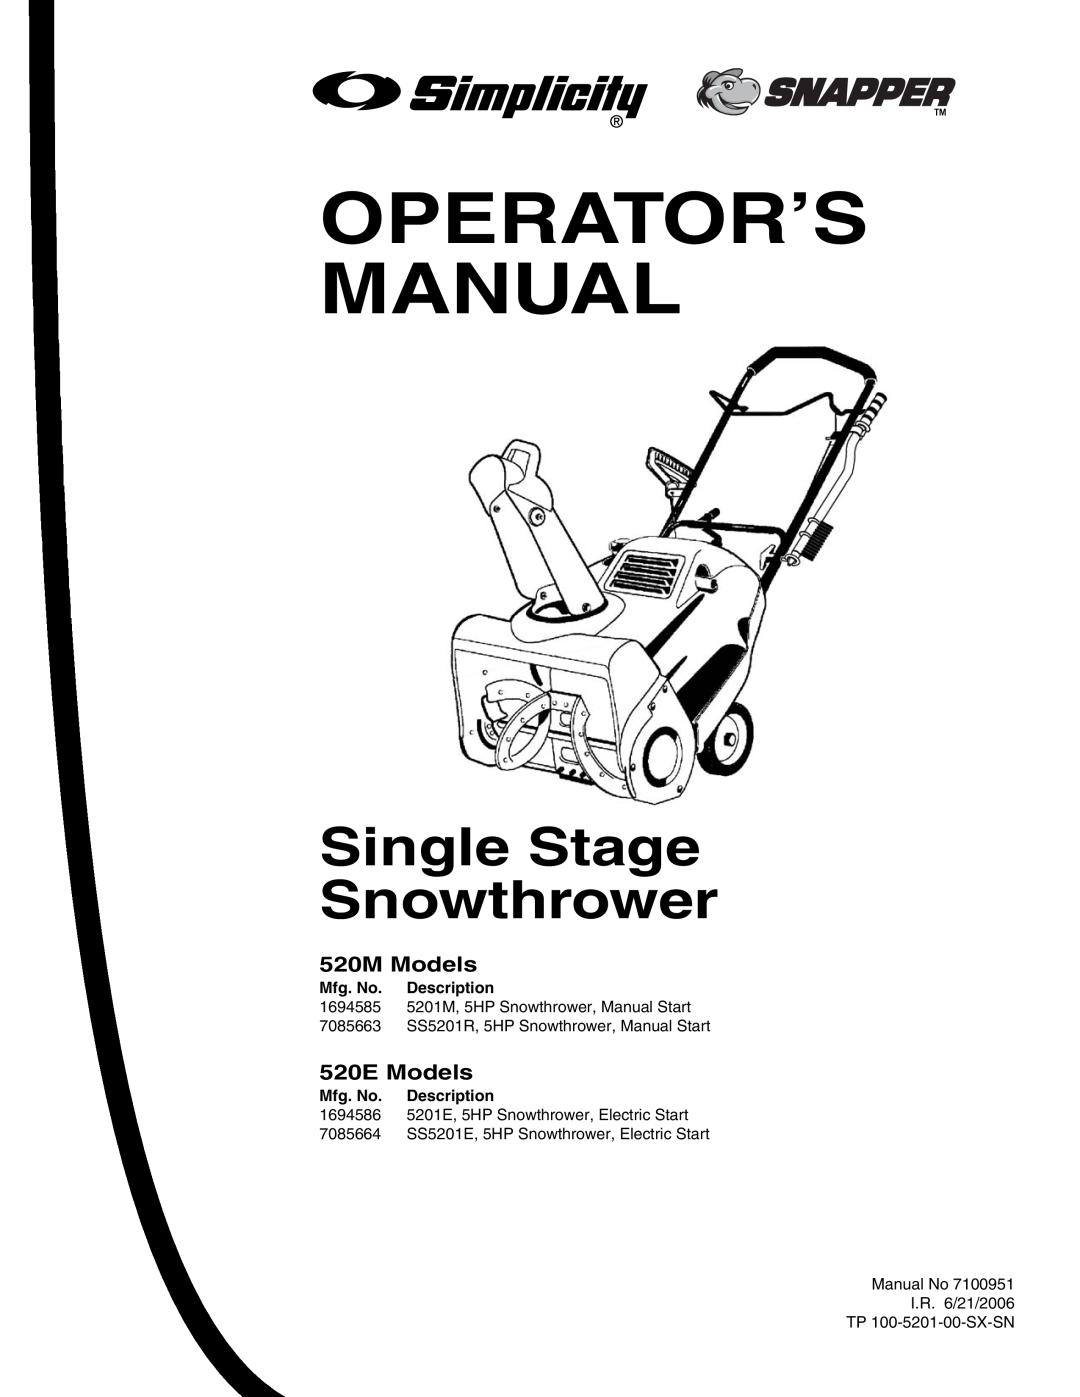 Snapper 5201m, 5201e manual 520M Models, 520E Models, Operator’S Manual, Single Stage Snowthrower 